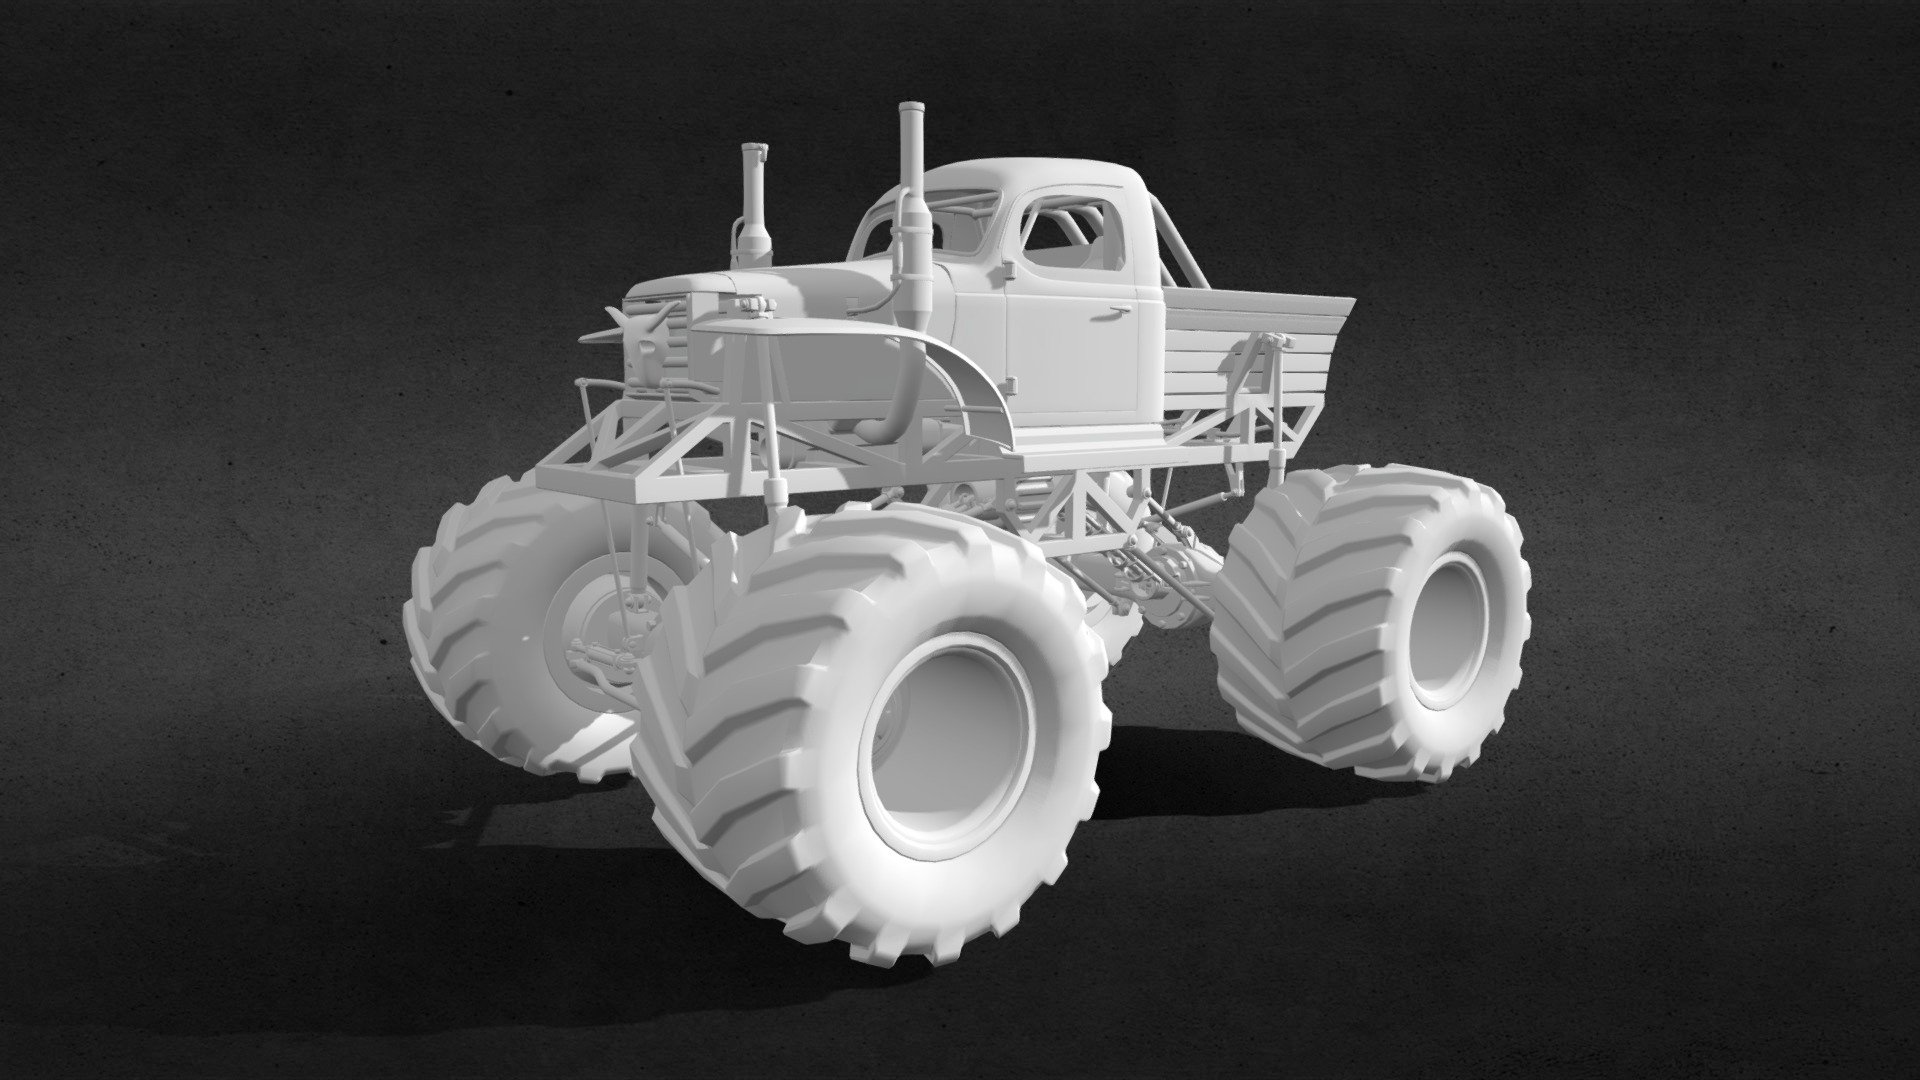 My wip reimagination of Stuntman Ignition's Dodge Power Wagon-based monster truck. I updated design with proper four link setup and replaced comically small axles with 5-ton military axles and 20-ton Clark planetaries. &lsquo;91 Unnamed style swaybar and &lsquo;88 style pan hard bar. &lsquo;94 Untamed helicopter landing gear struts for shocks.

Everything modeled by me, uses repurposed resources from my Untamed-project and cockpit of Virginia Giant.

You can find more information and progress pics here:
https://discord.gg/TEDJz92Agt - [Sneak Peek] Stuntman: Ignition Monster Truck - 3D model by Jorma Rysky (Joona Venäläinen) (@Rysky) 3d model